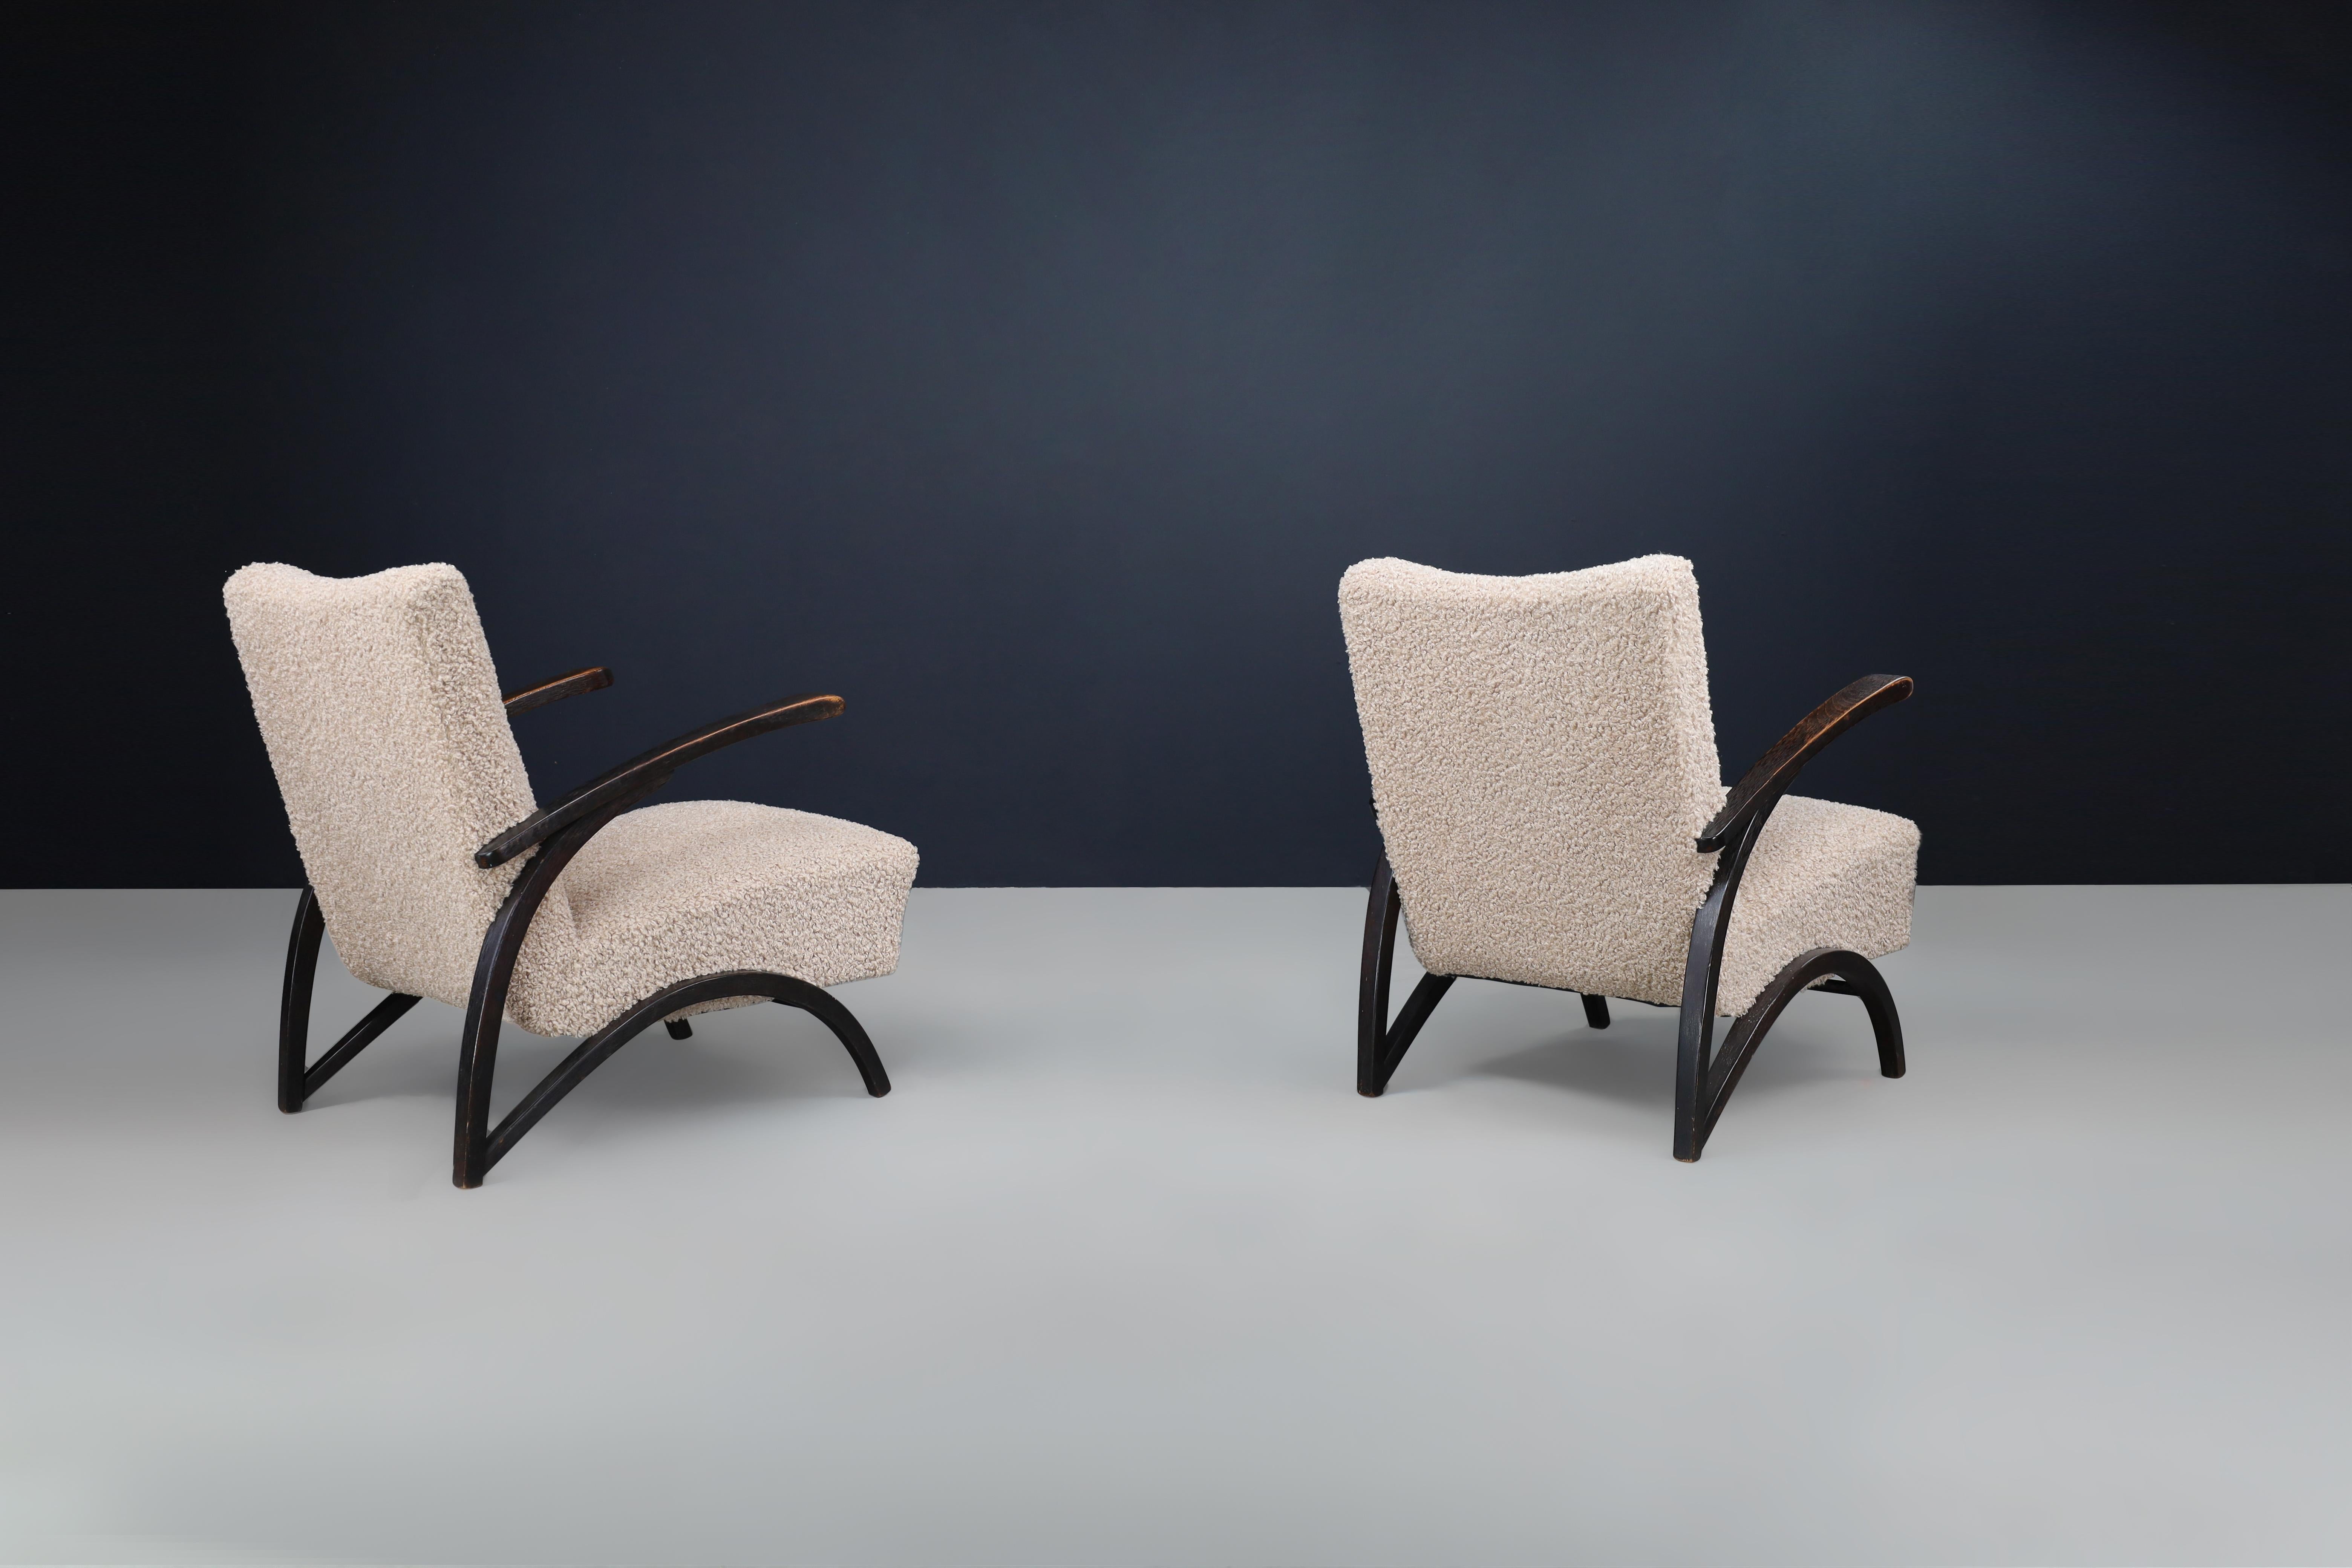 20th Century Jindrich Halabala Lounge Chairs in Teddy  Upholstery Czech Republic 1930.  For Sale